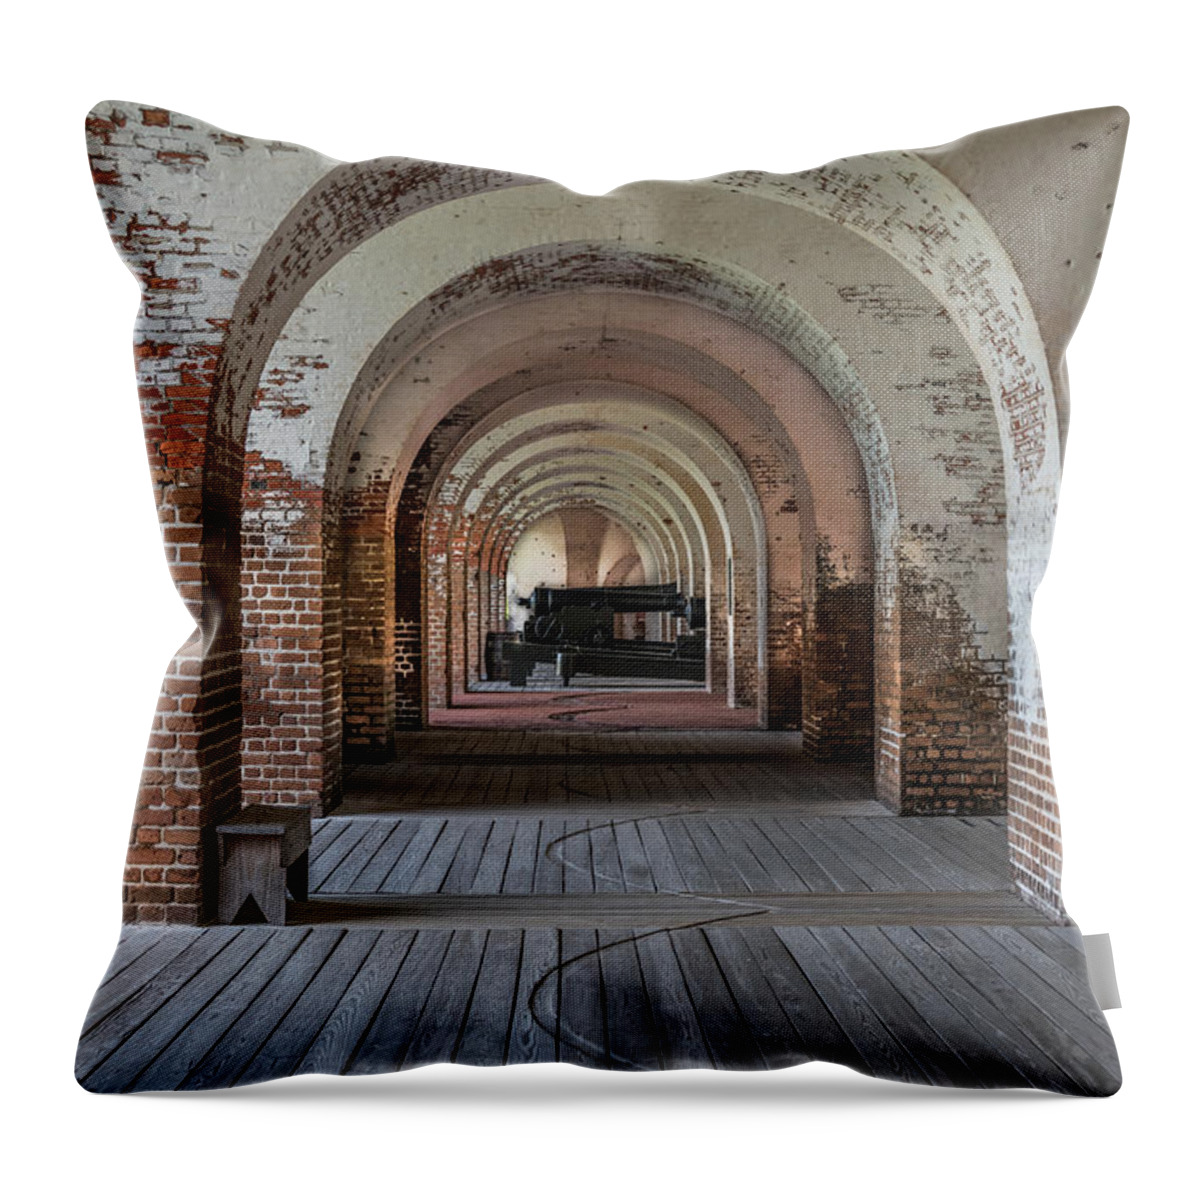 Fort Throw Pillow featuring the photograph Fort Pulaski by Jaime Mercado